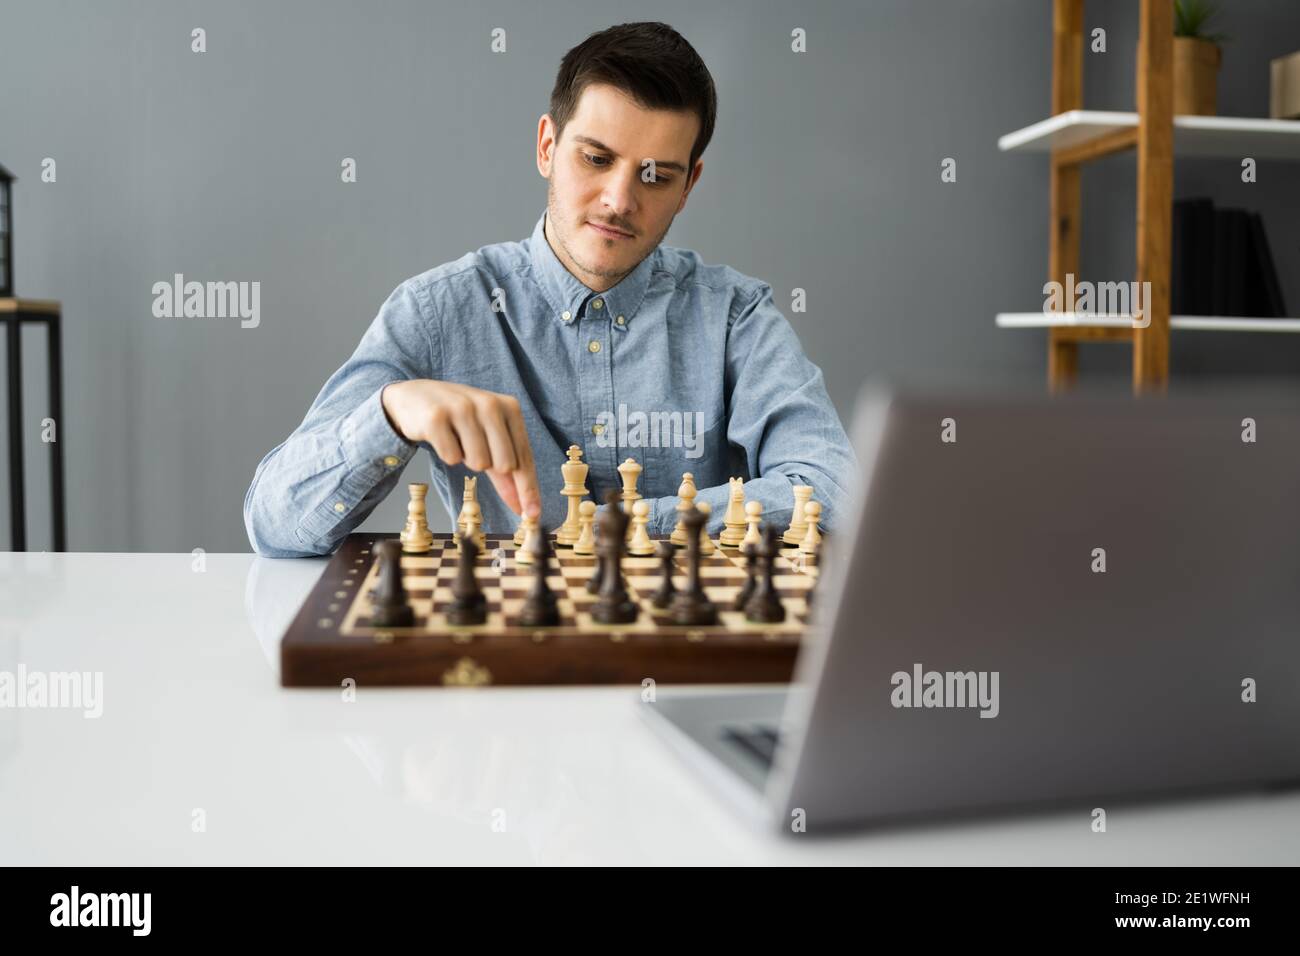 Man Playing Chess Against Computer Stock Image - Image of defeat